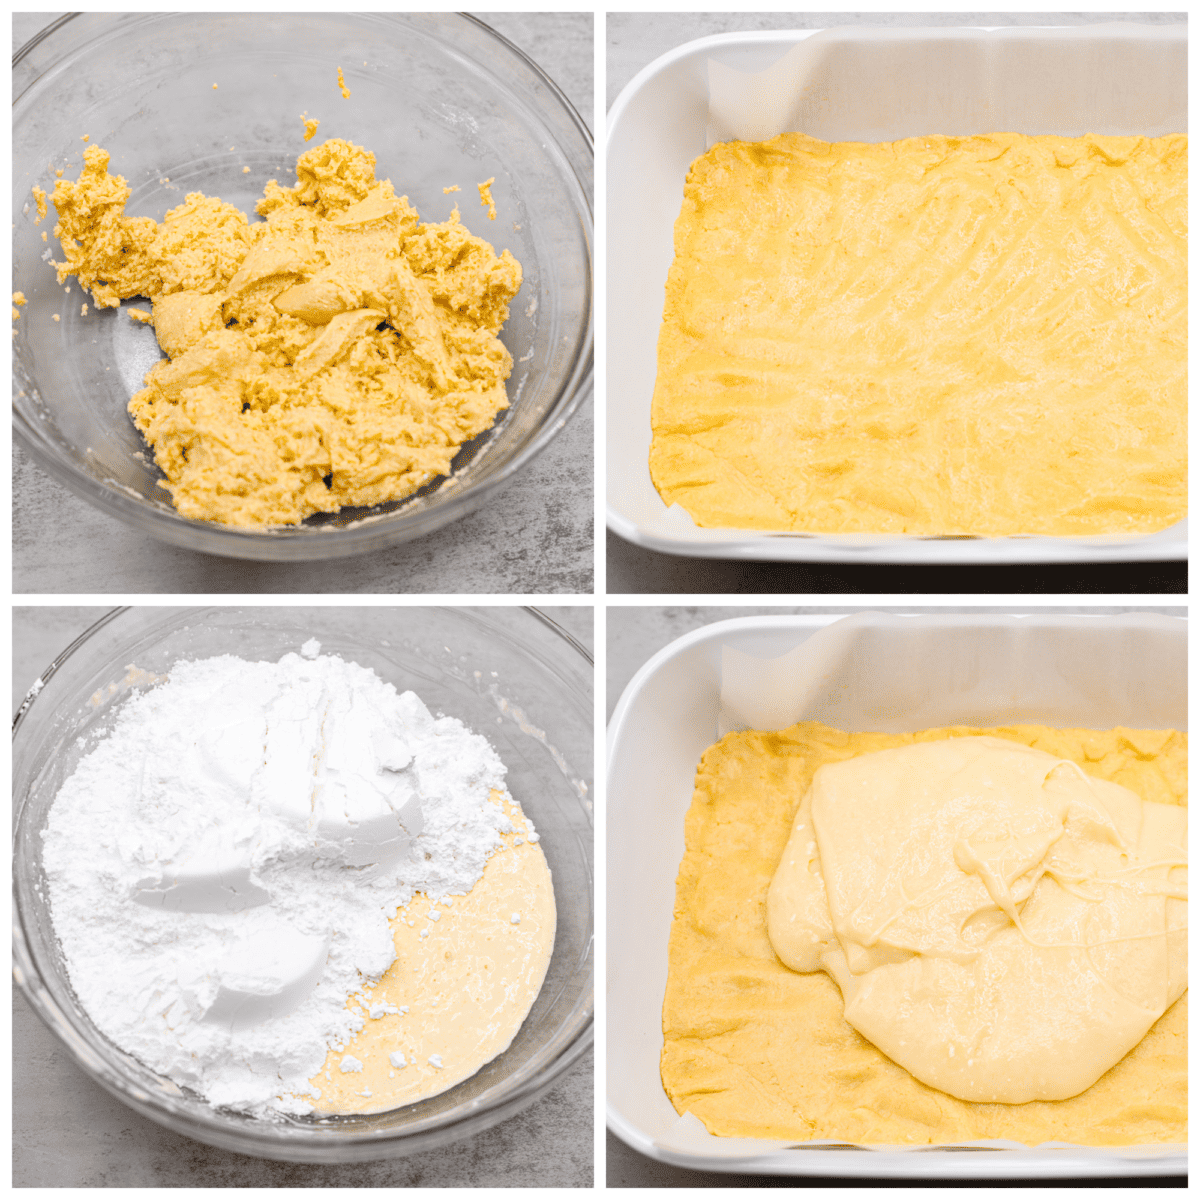 4-photo collage of the cake batter and topping being prepared.